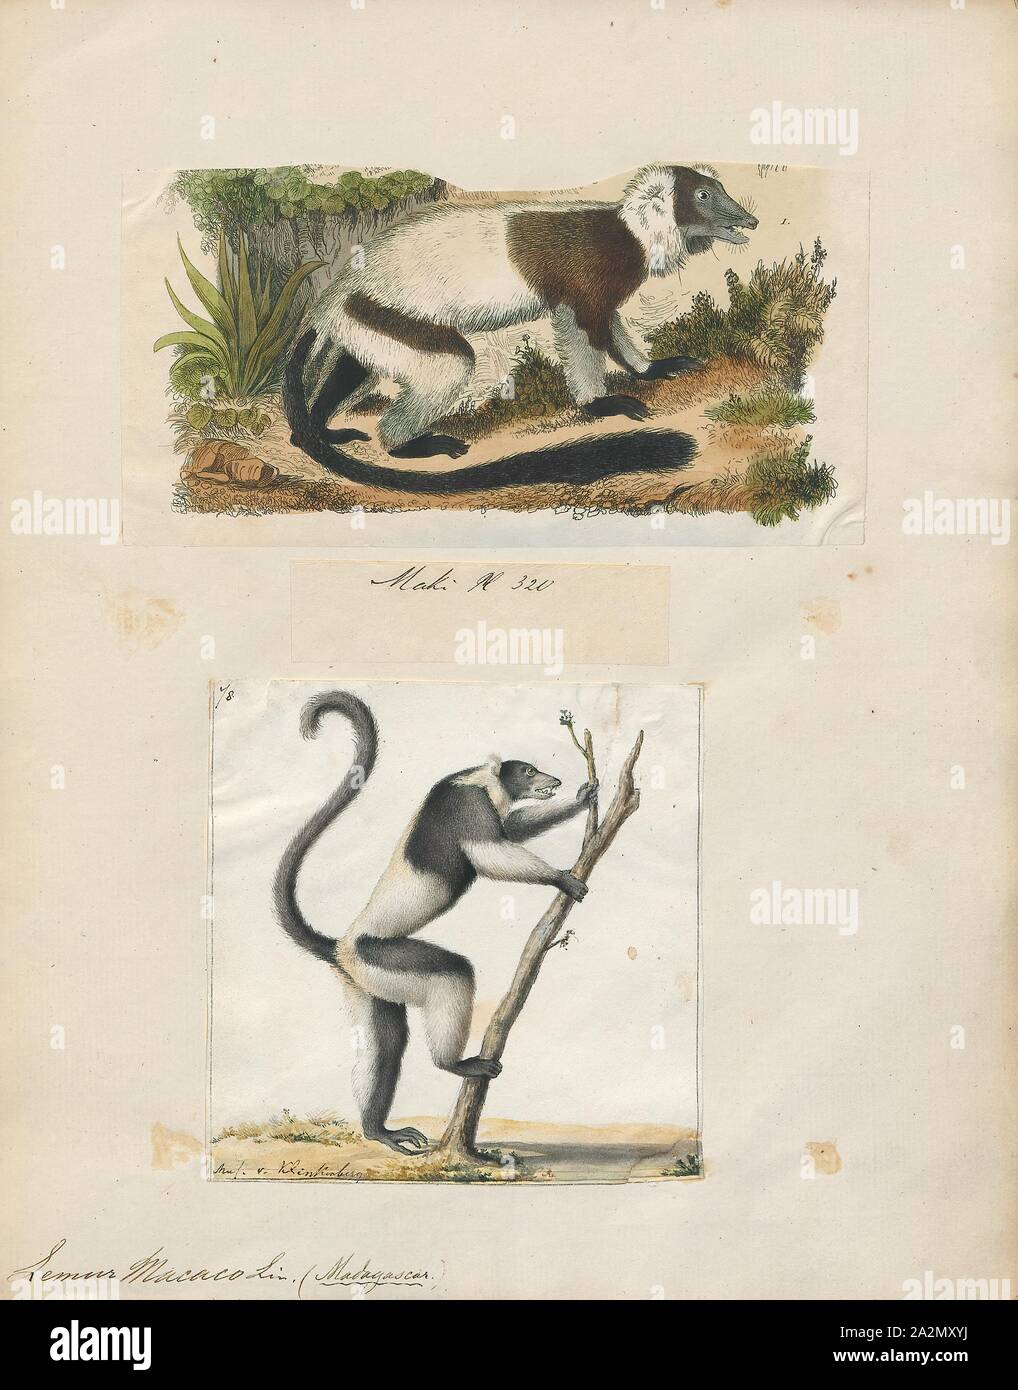 Lemur macaco, Print, Lemurs (from Latin lemures – ghosts or spirits) are mammals of the order Primates, divided into 8 families and consisting of 15 genera and around 100 existing species. They are native only to the island of Madagascar. Most existing lemurs are small, have a pointed snout, large eyes, and a long tail. They chiefly live in trees (arboreal), and are active at night (nocturnal)., 1700-1880 Stock Photo